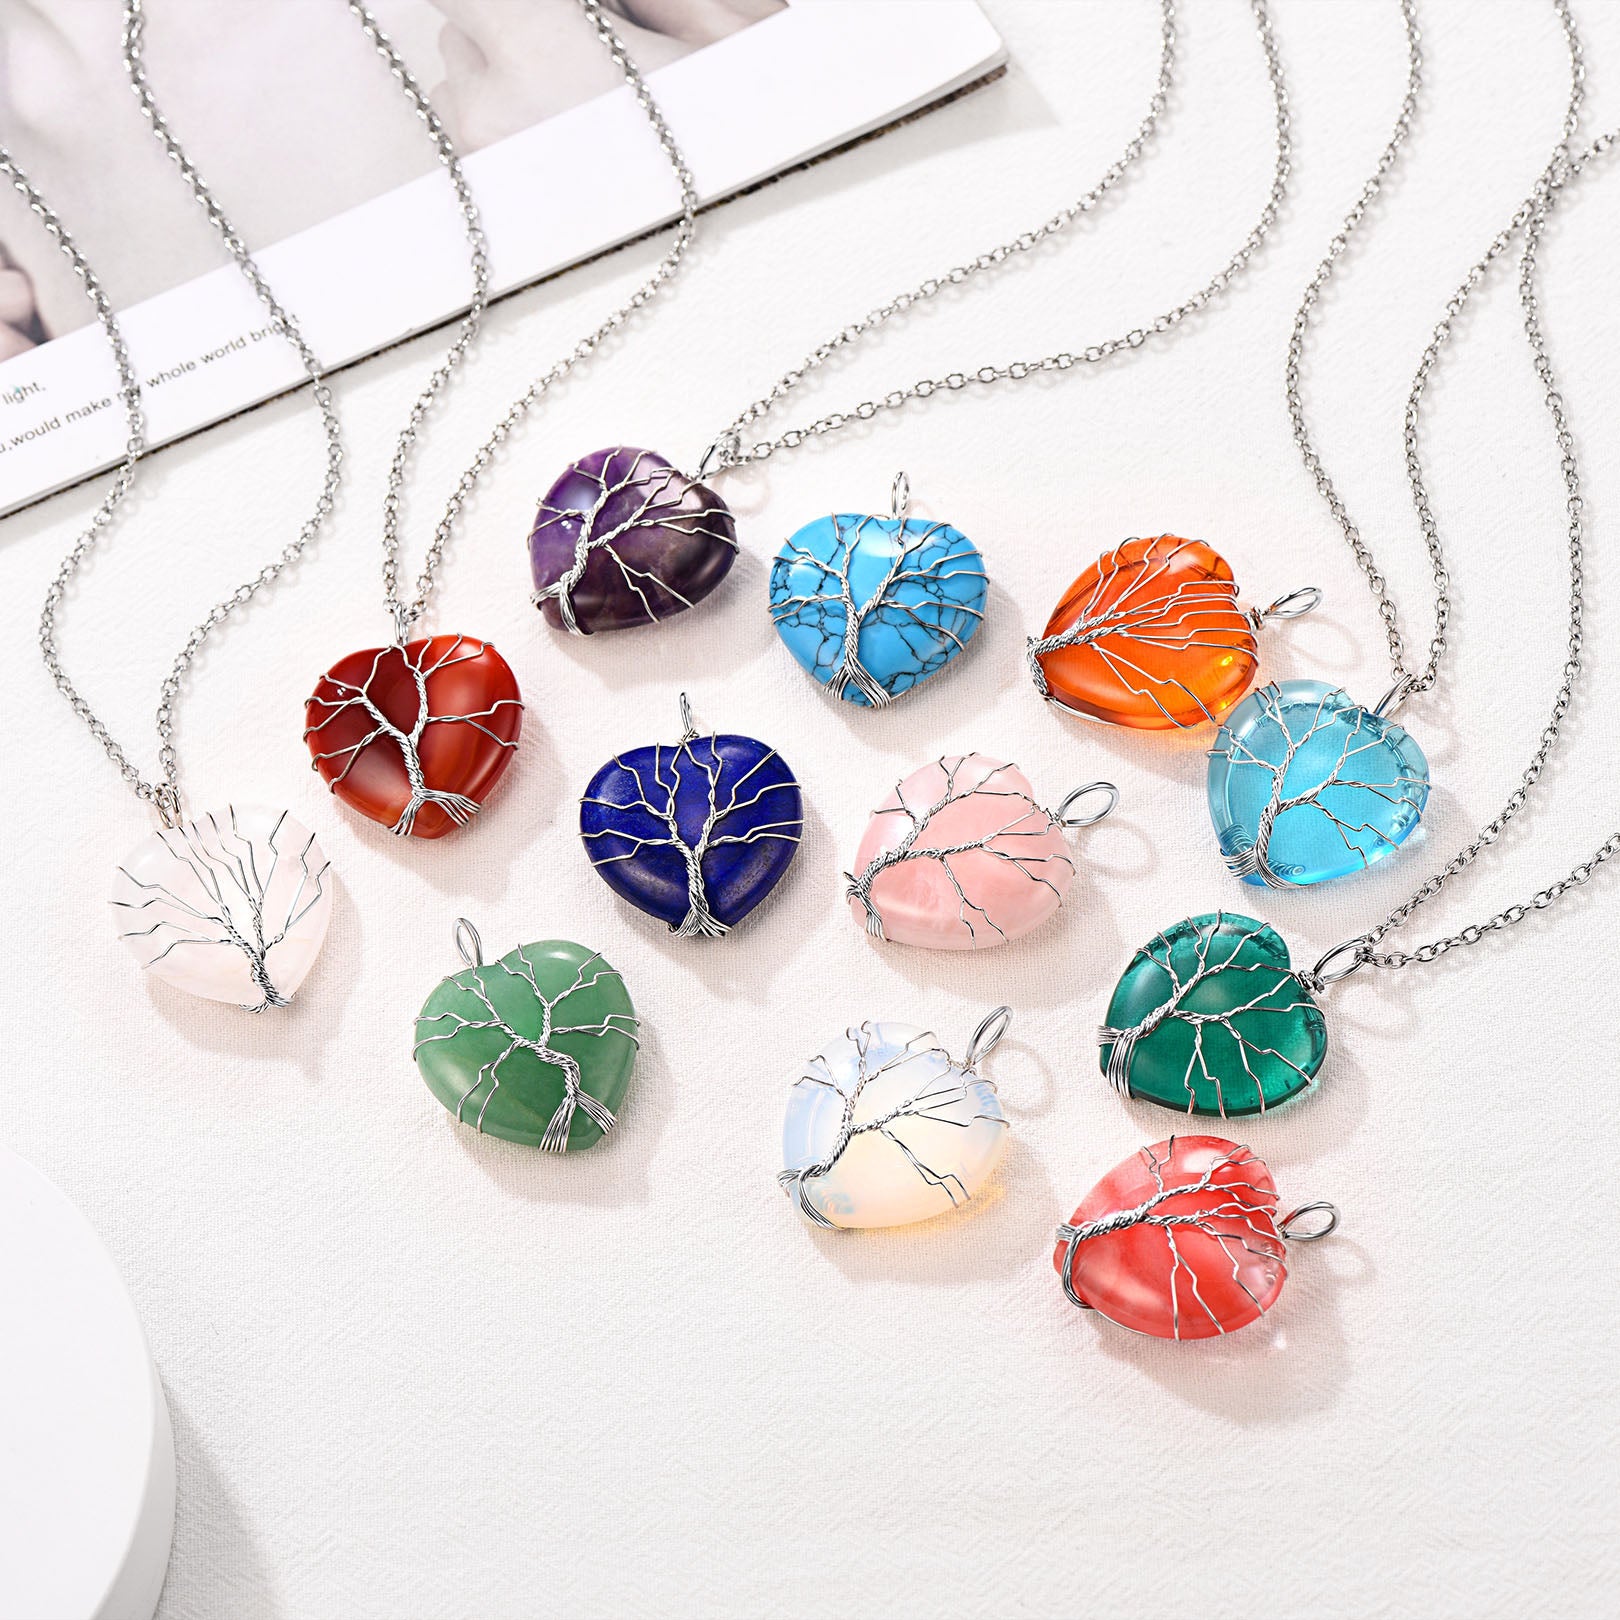 Tree Of Life Resin Necklace Pendant Natural Quartz Aura Healing Crystal  Point Chakra Jewelry Set From Sevenstonejewelry, $8.75 | DHgate.Com